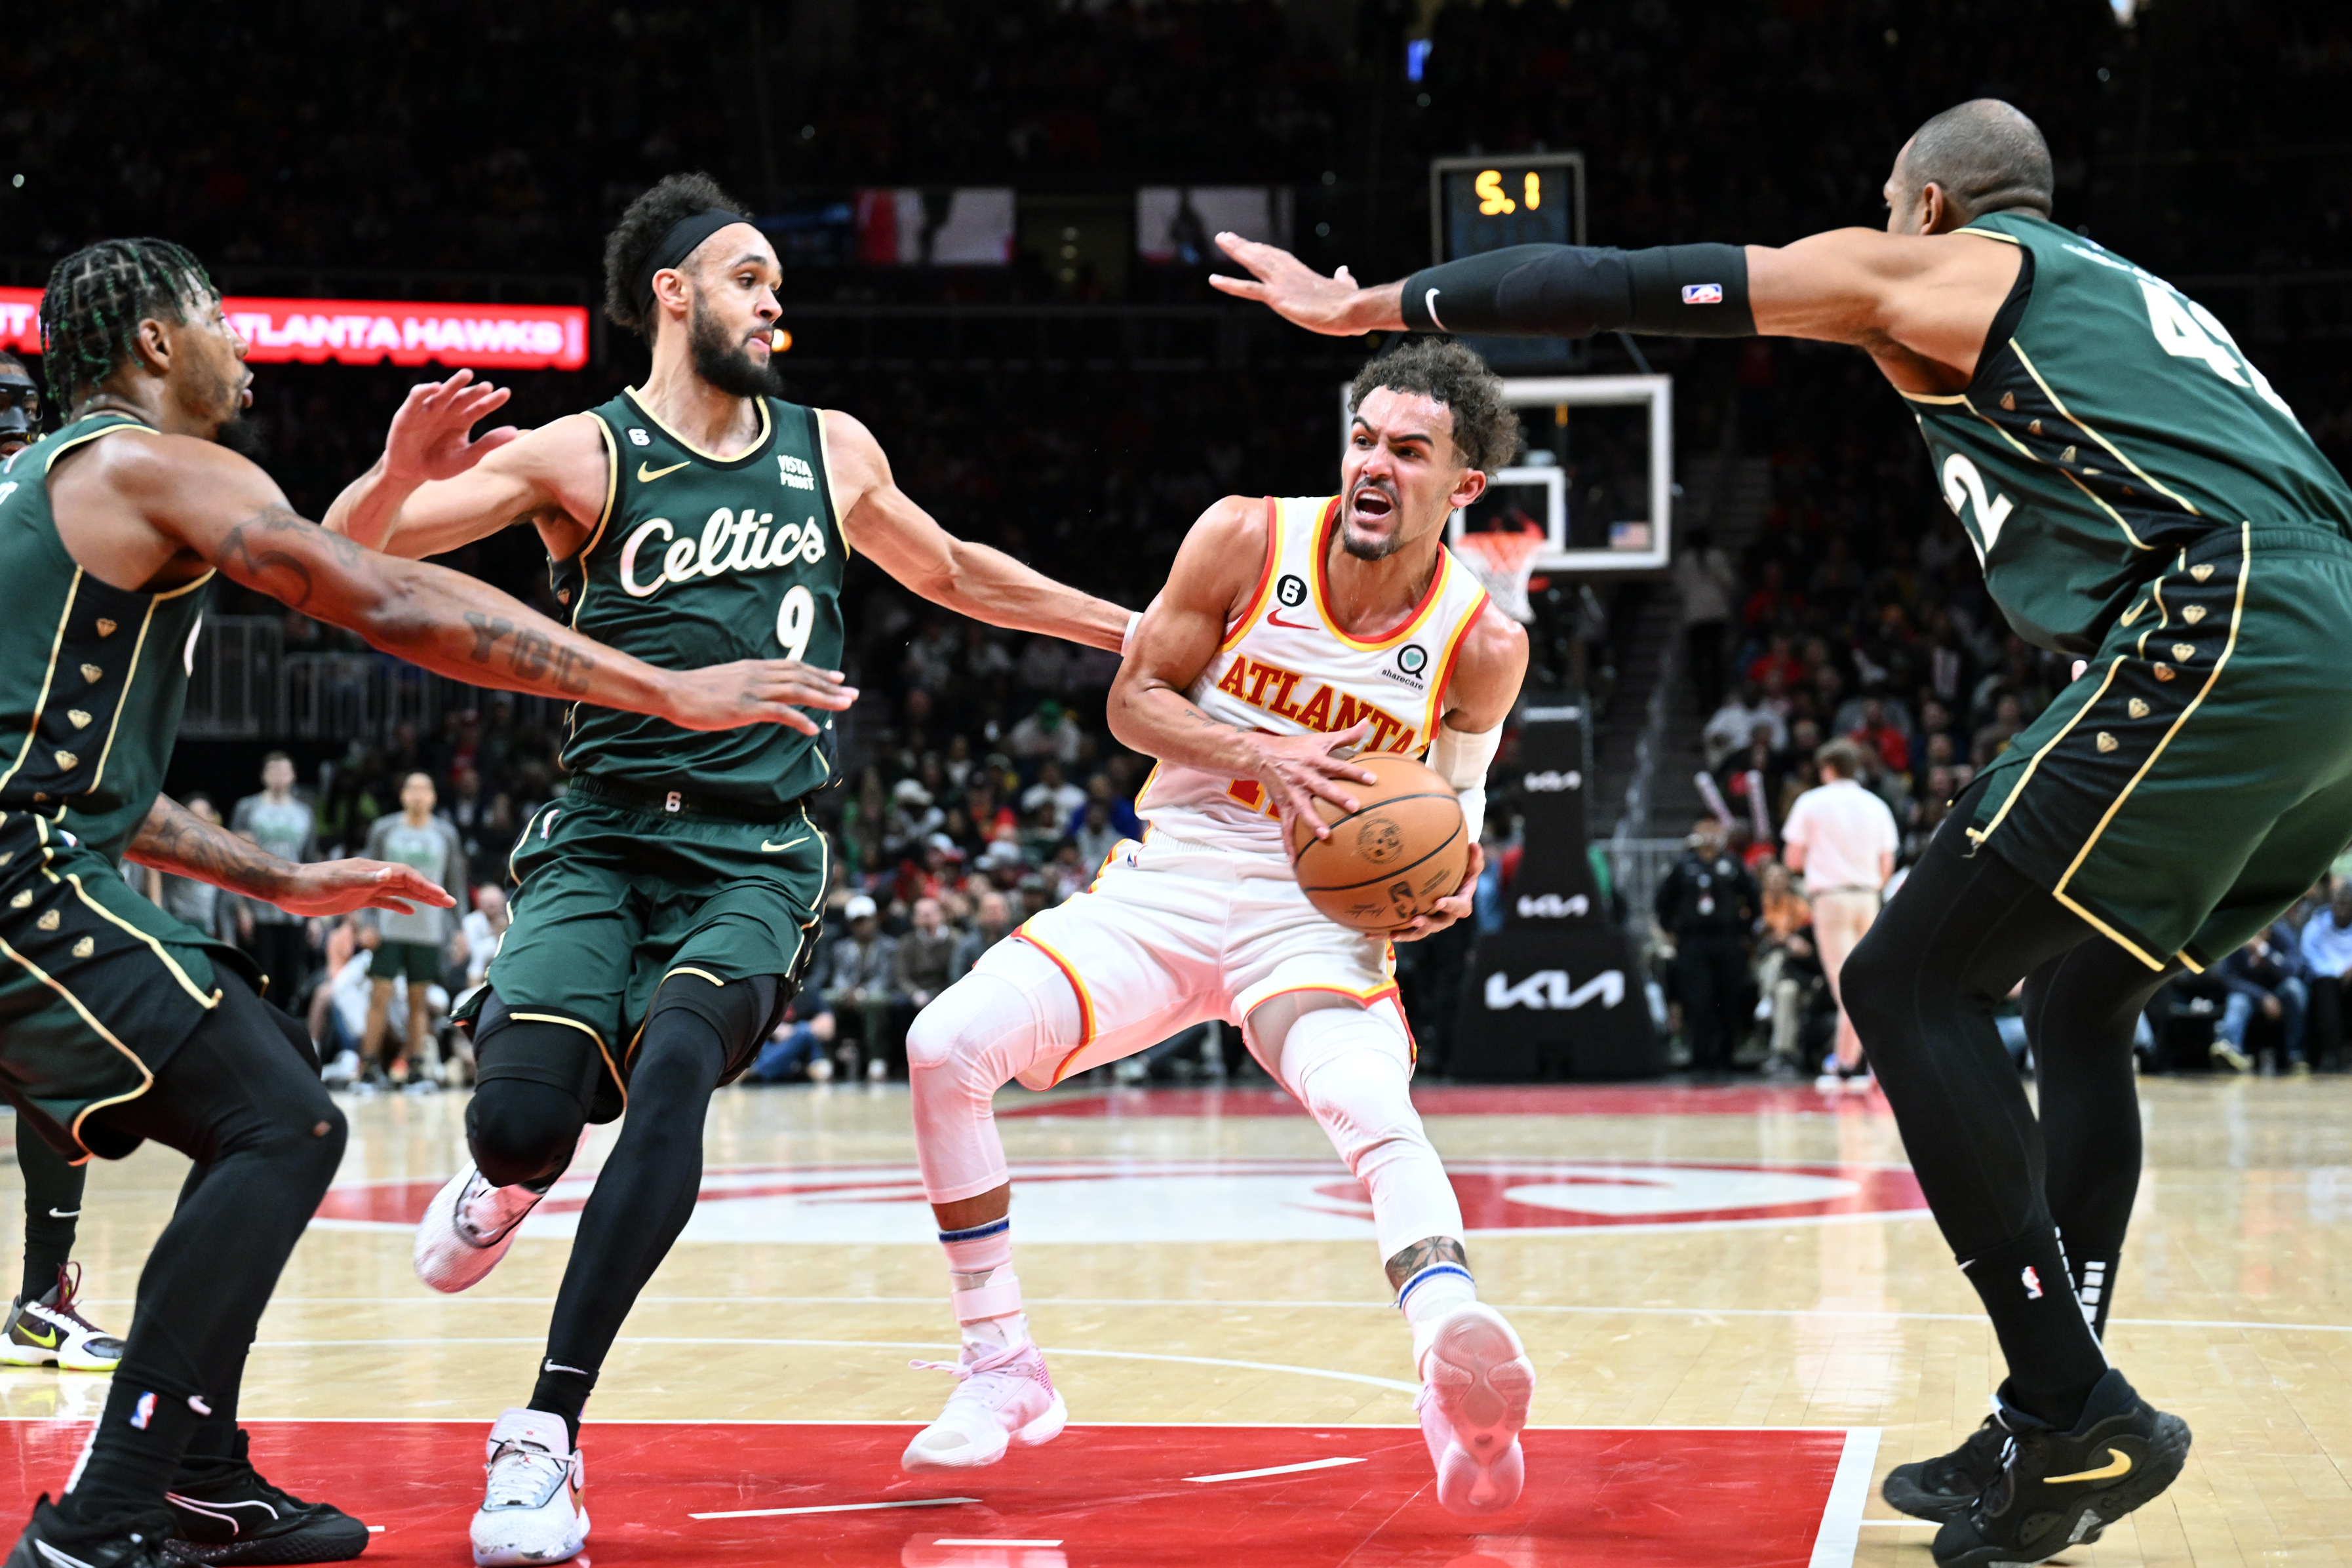 Trae Young (C) of the Atlanta Hawks is surrounded by defenders of the Boston Celtics in the game at State Farm Arena in Atlanta, Gerogia, March 11, 2023. /CFP